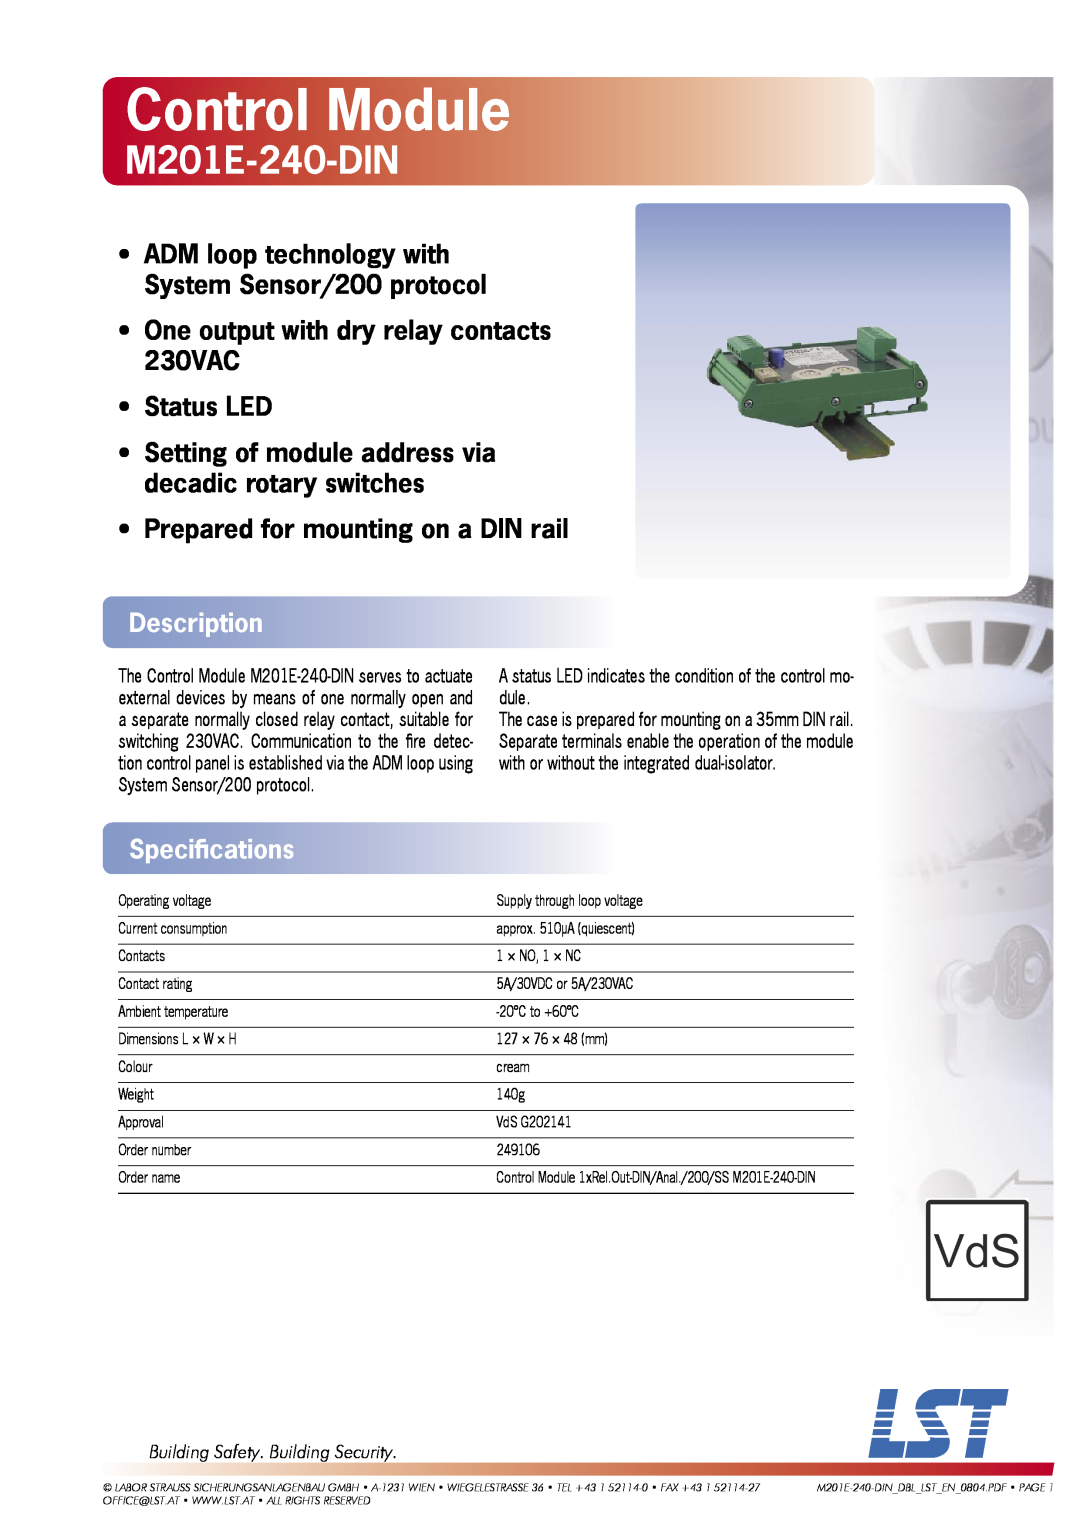 LST M201E-240-DIN specifications Control Module, One output with dry relay contacts 230VAC, Status LED, Description 